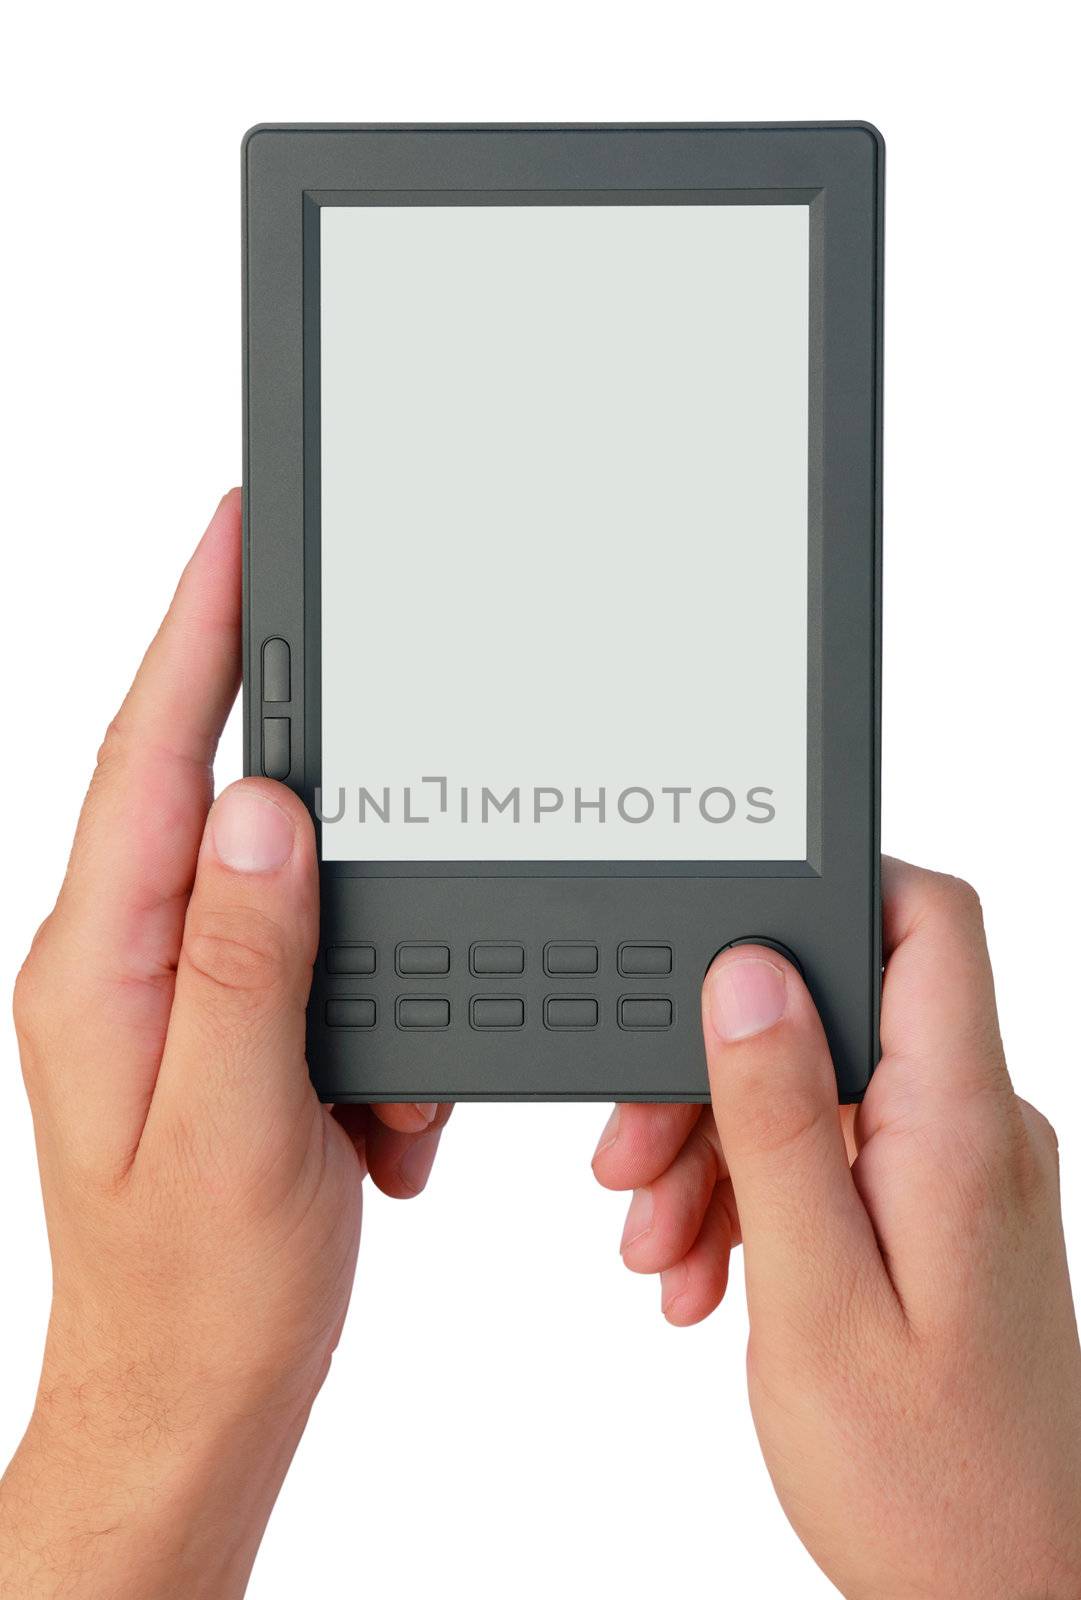 e-book reader device in hands, close up, isolated
